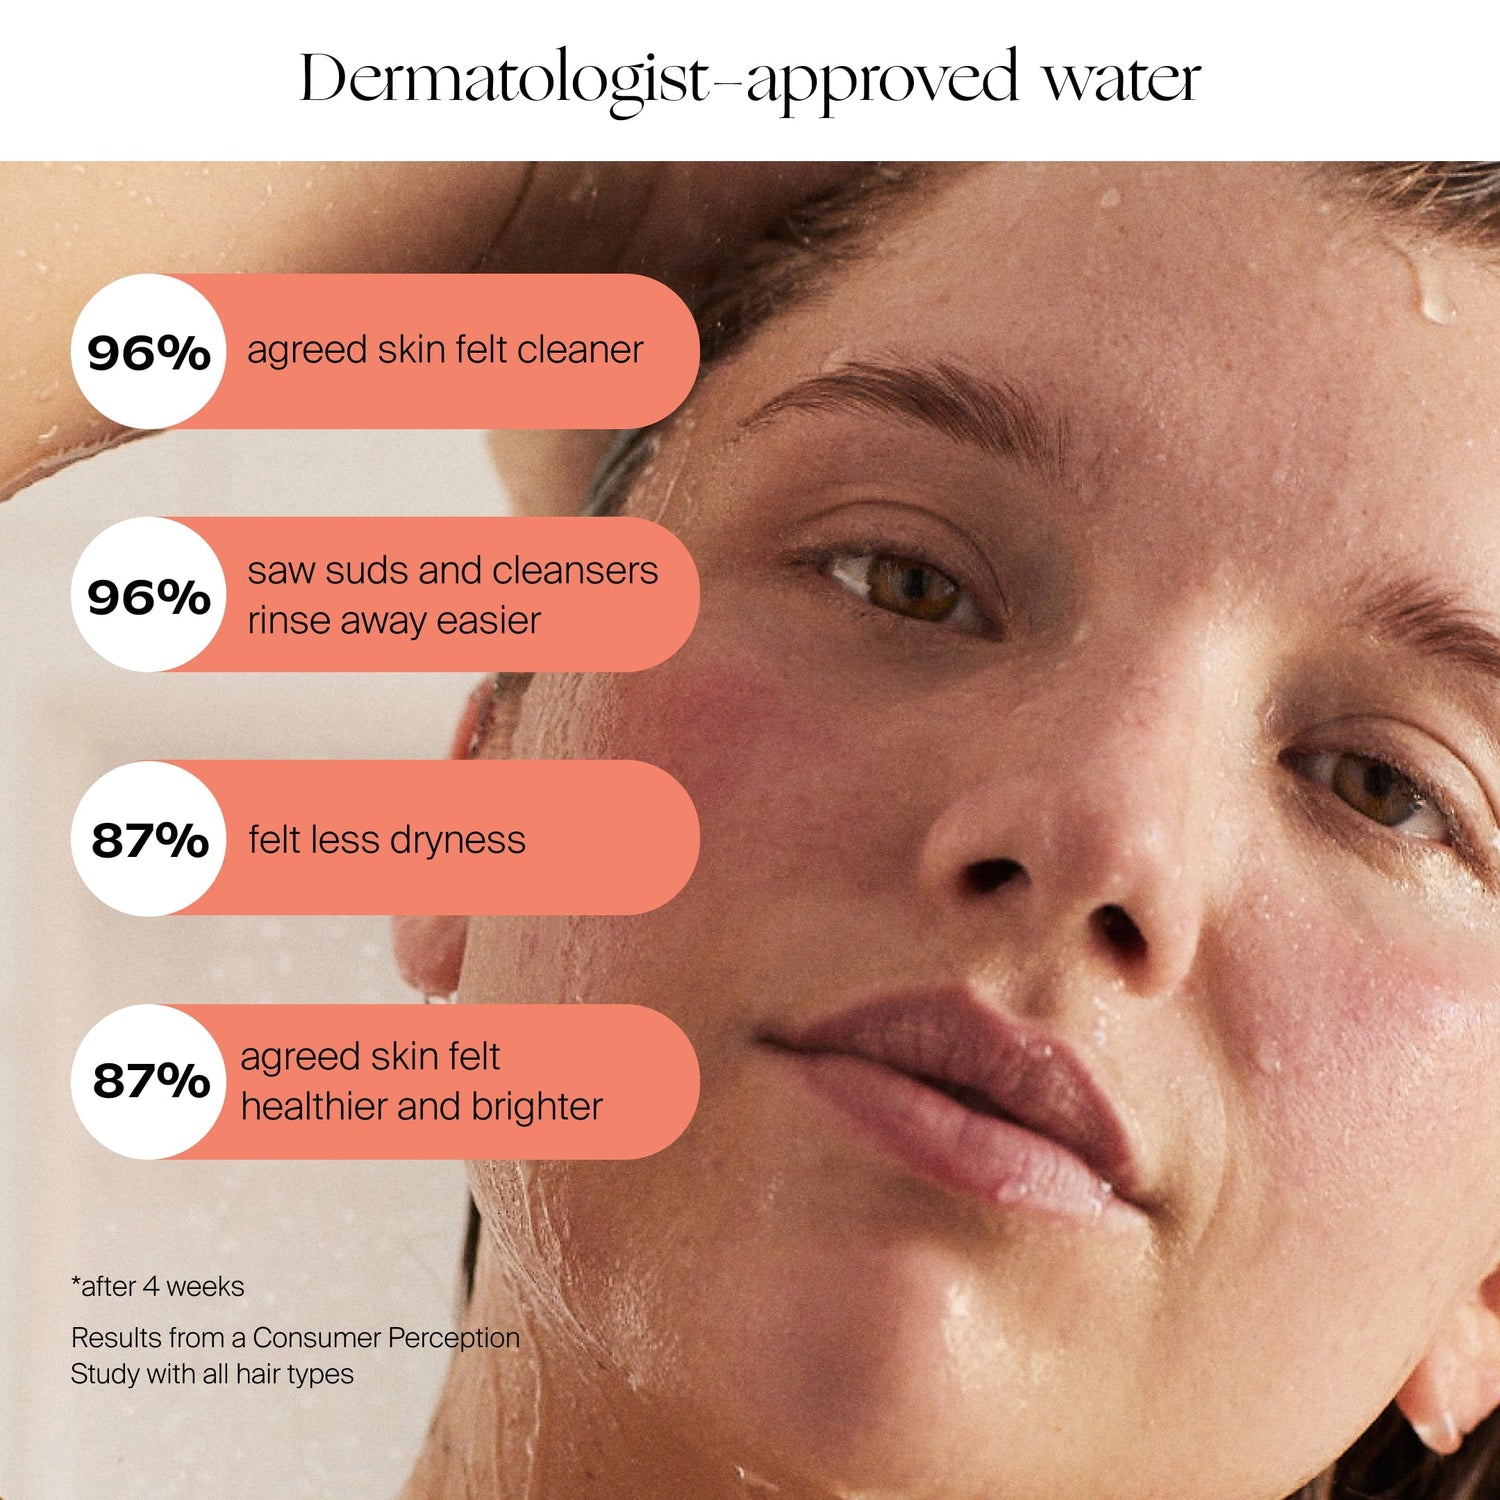 Filtered Showerhead | Lifestyle, Dermatologist-approved water